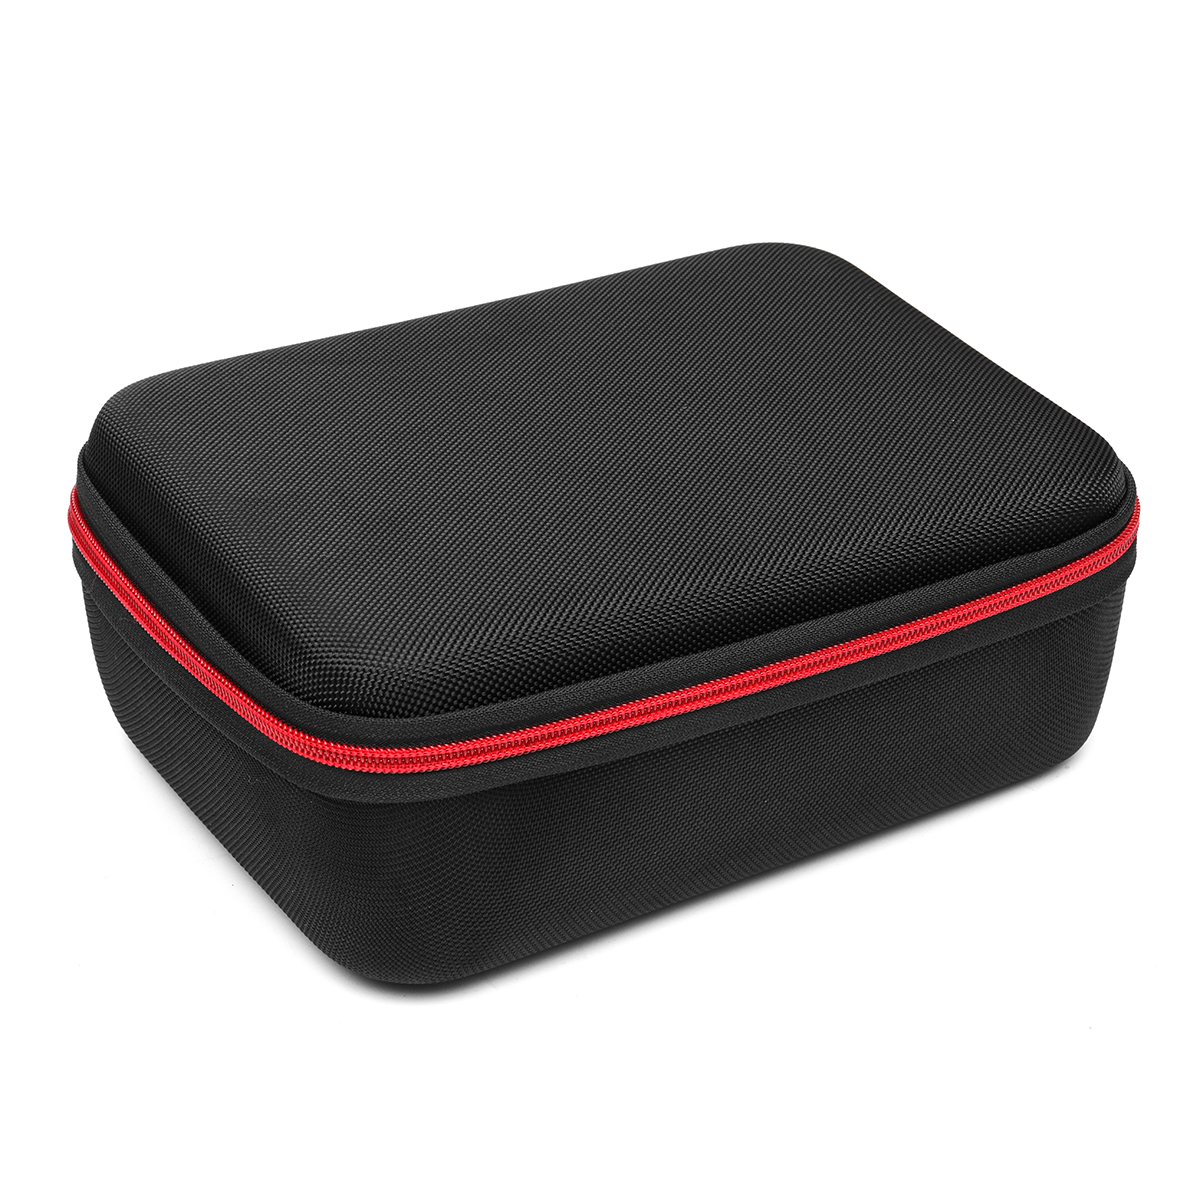 Portable Travel Storage Box Carry Case Bag For Nintendo Switch MINI SFC Game Console 11